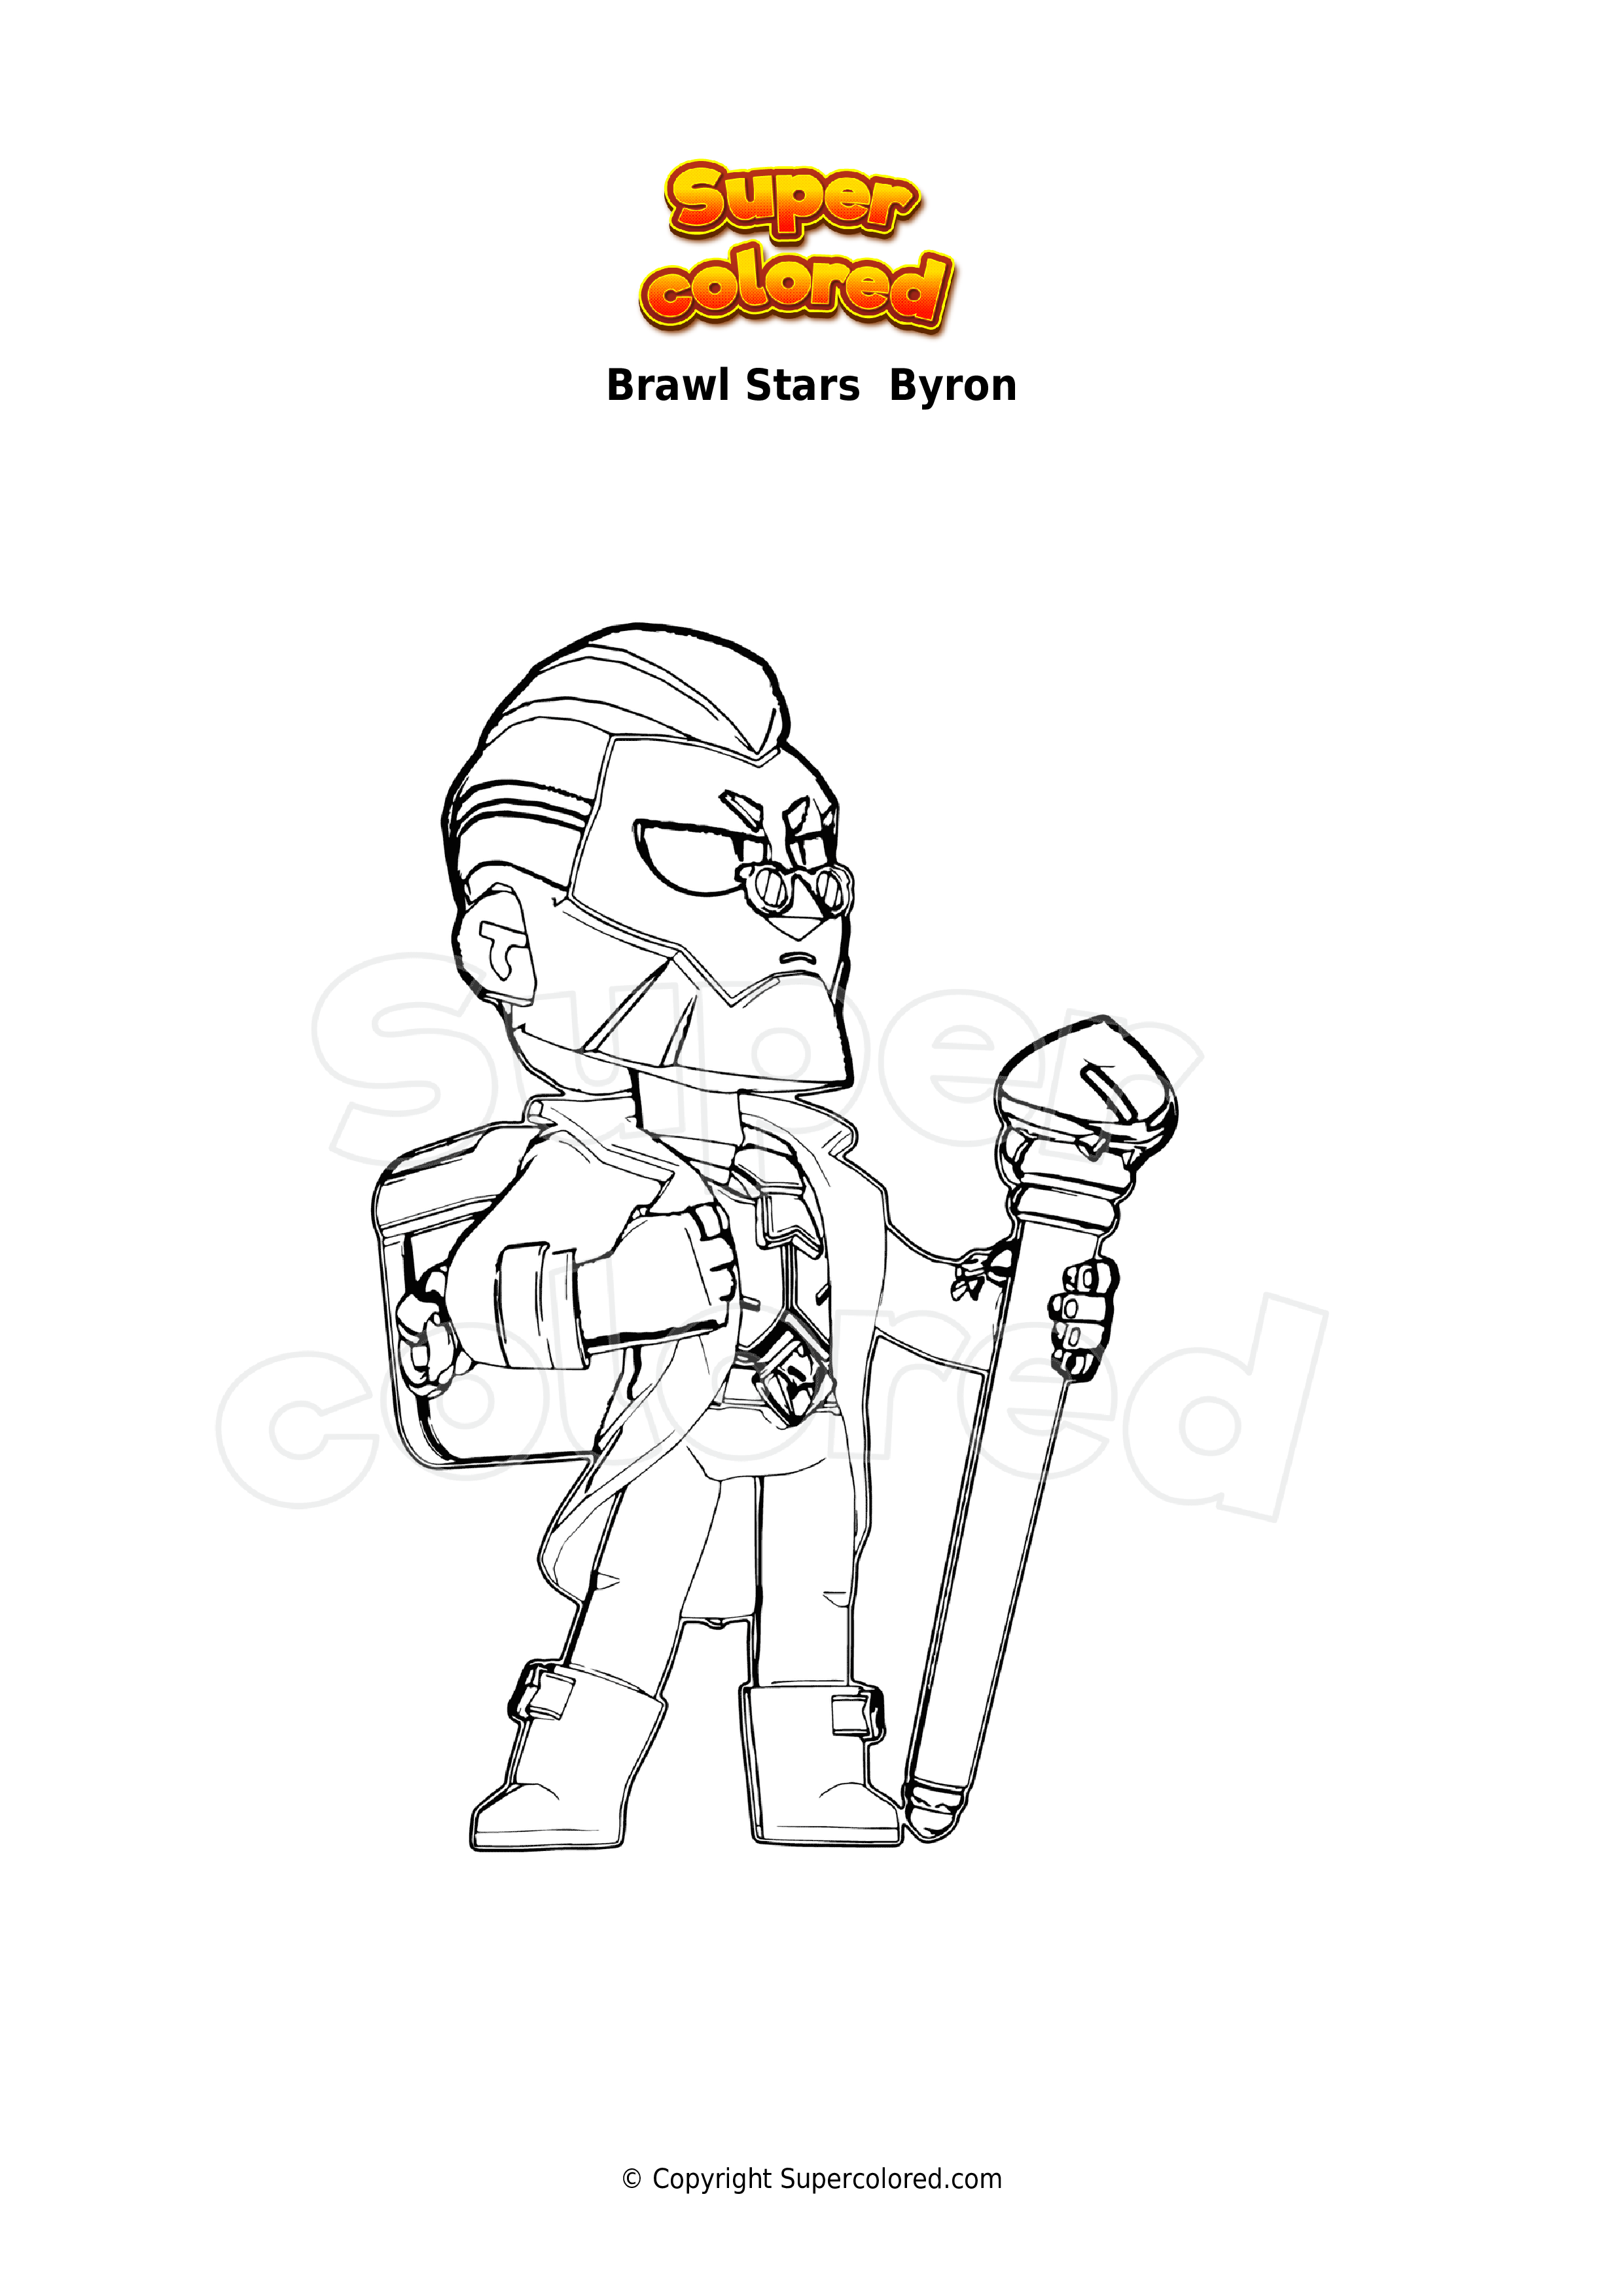 Coloriage Brawl Stars Byron Supercolored Com - coloriage brawl stars personnages